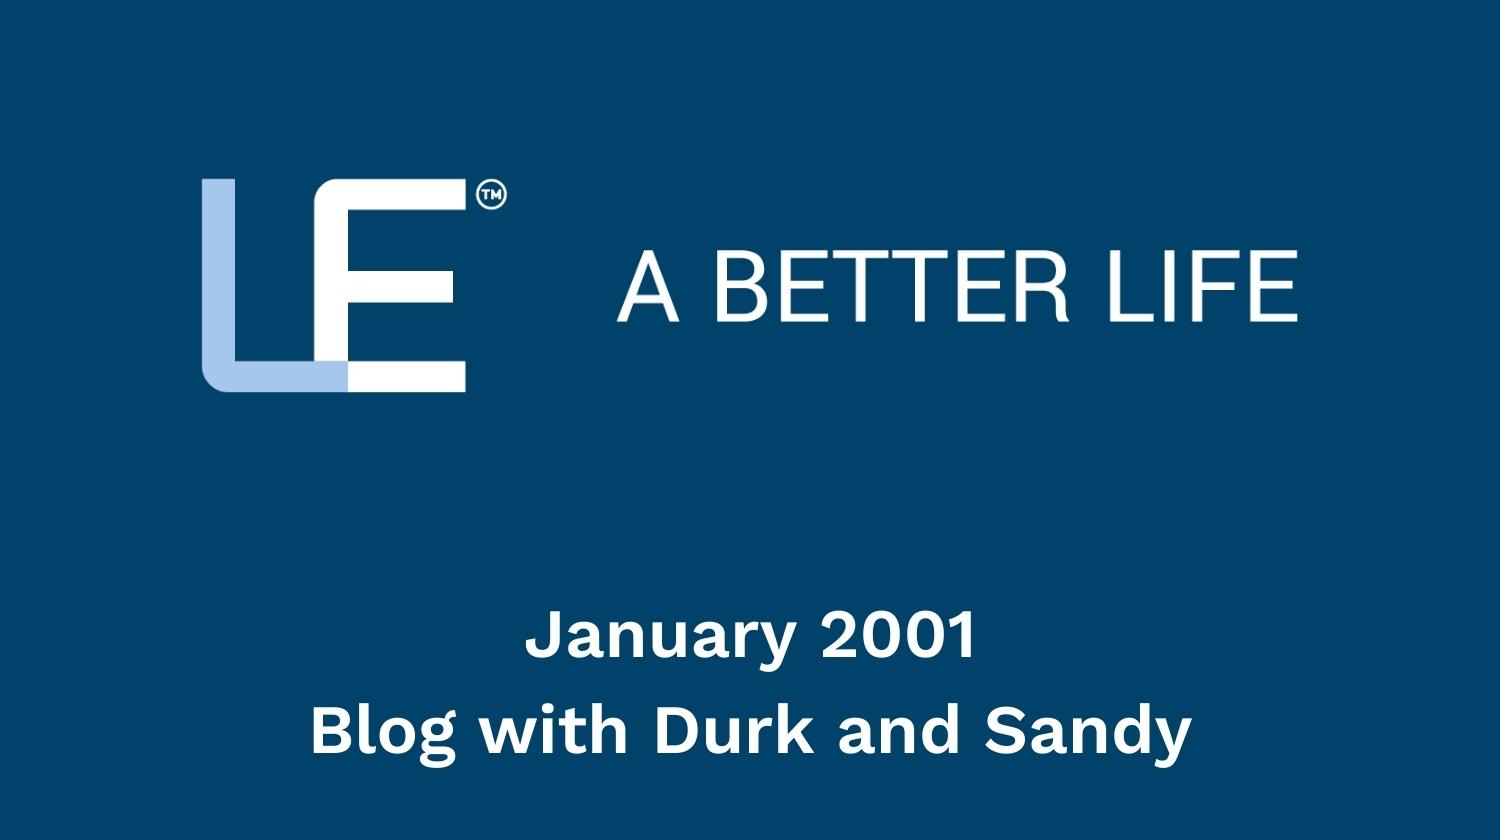 January 2001 Blog with Durk and Sandy